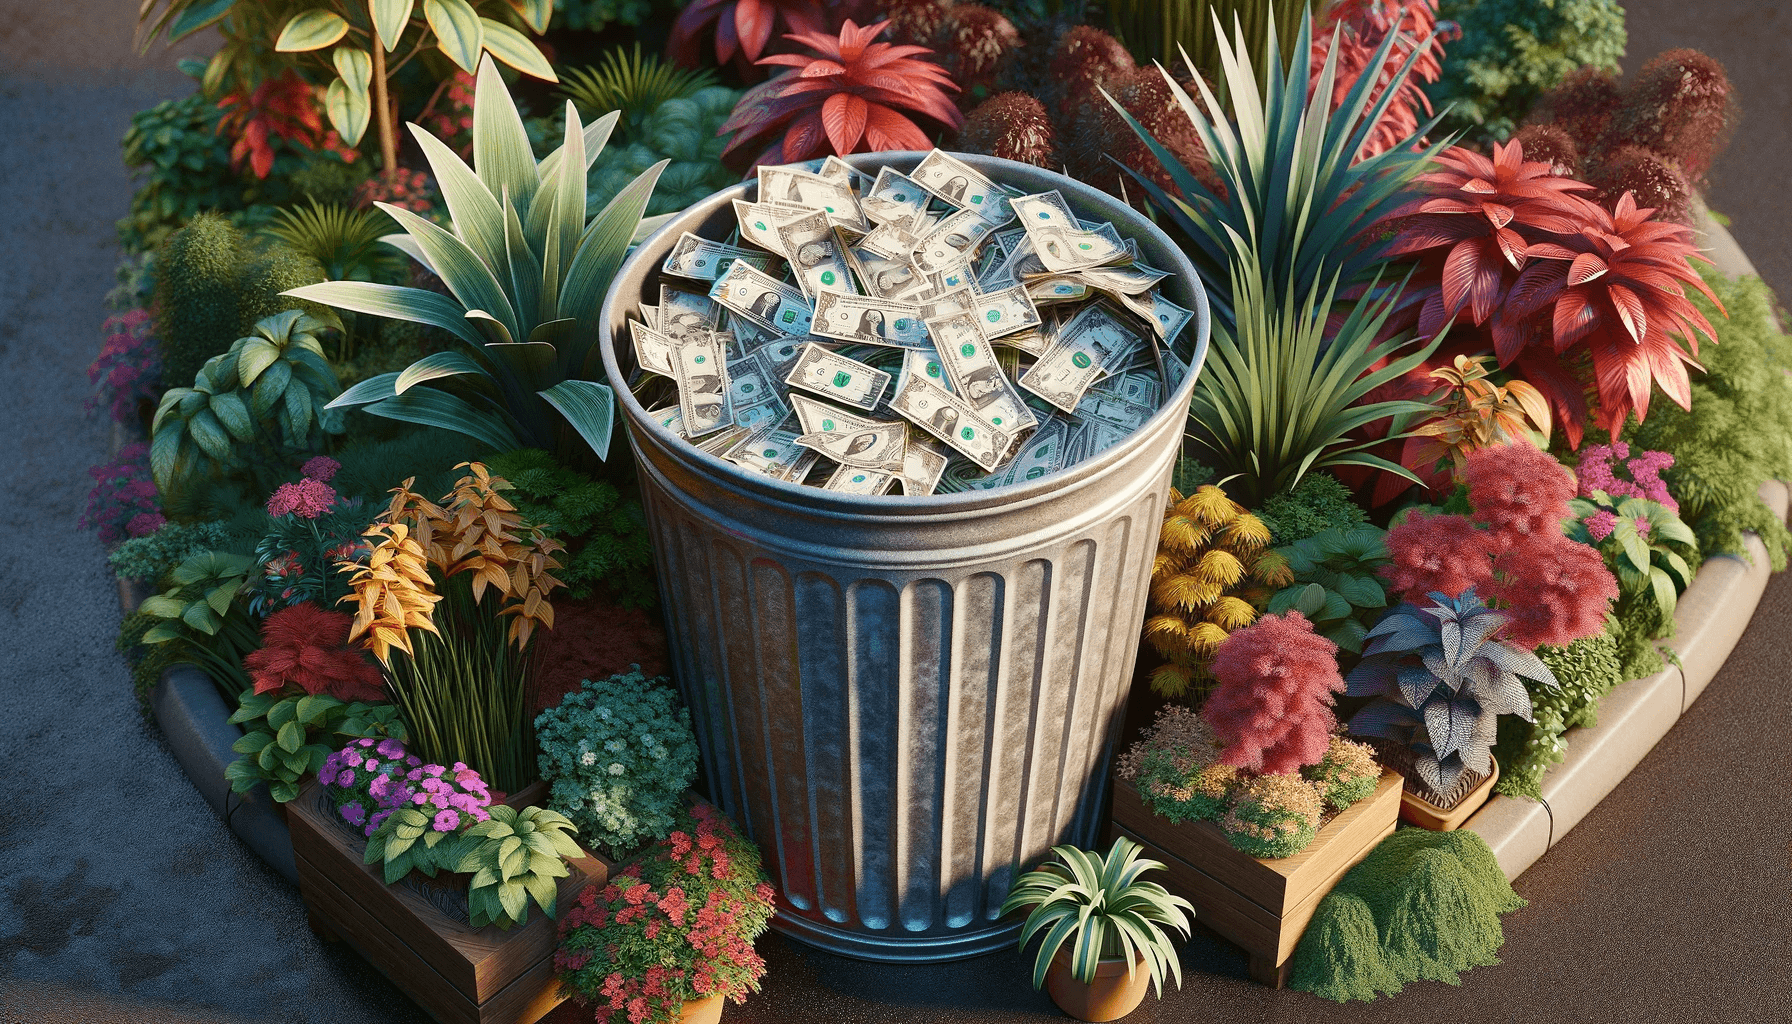 bad landscaping advertising - trashcan and plants (1)